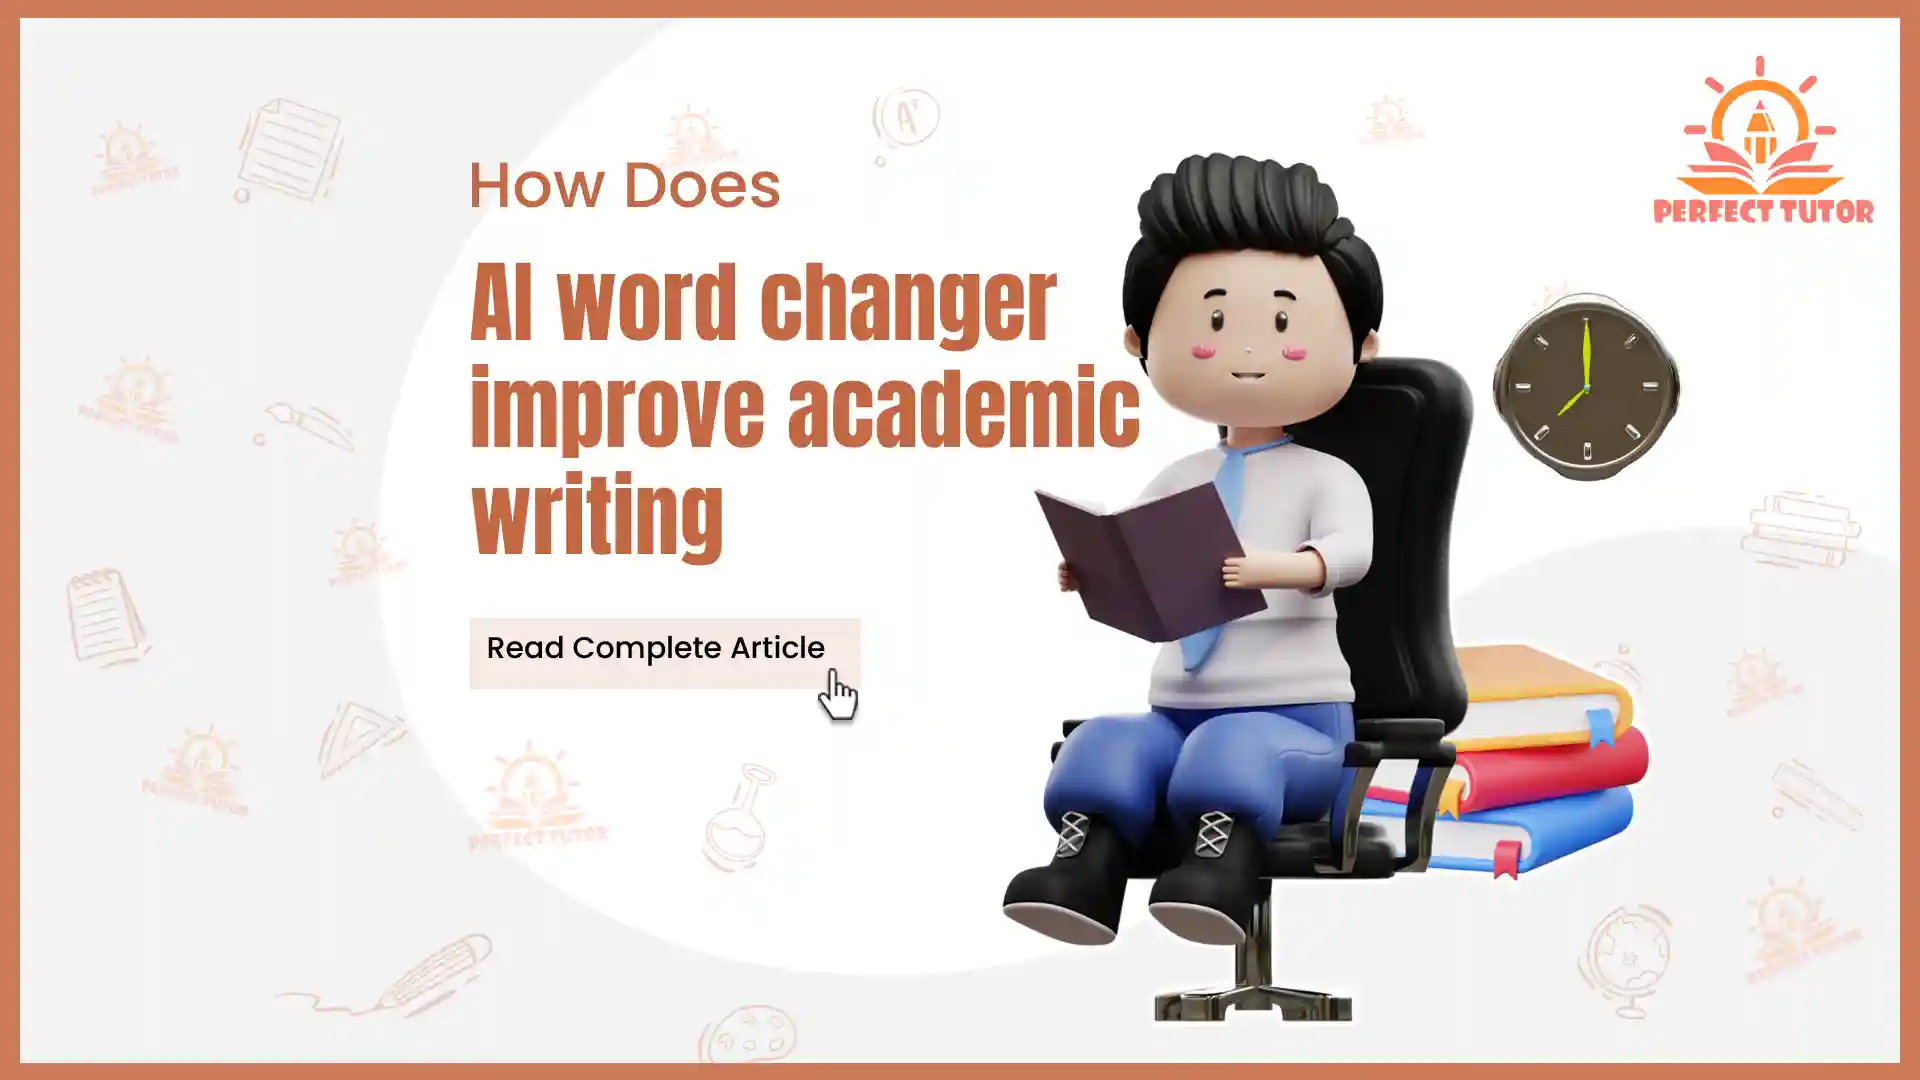 How Does an AI Word Changer Improve Academic Writing?